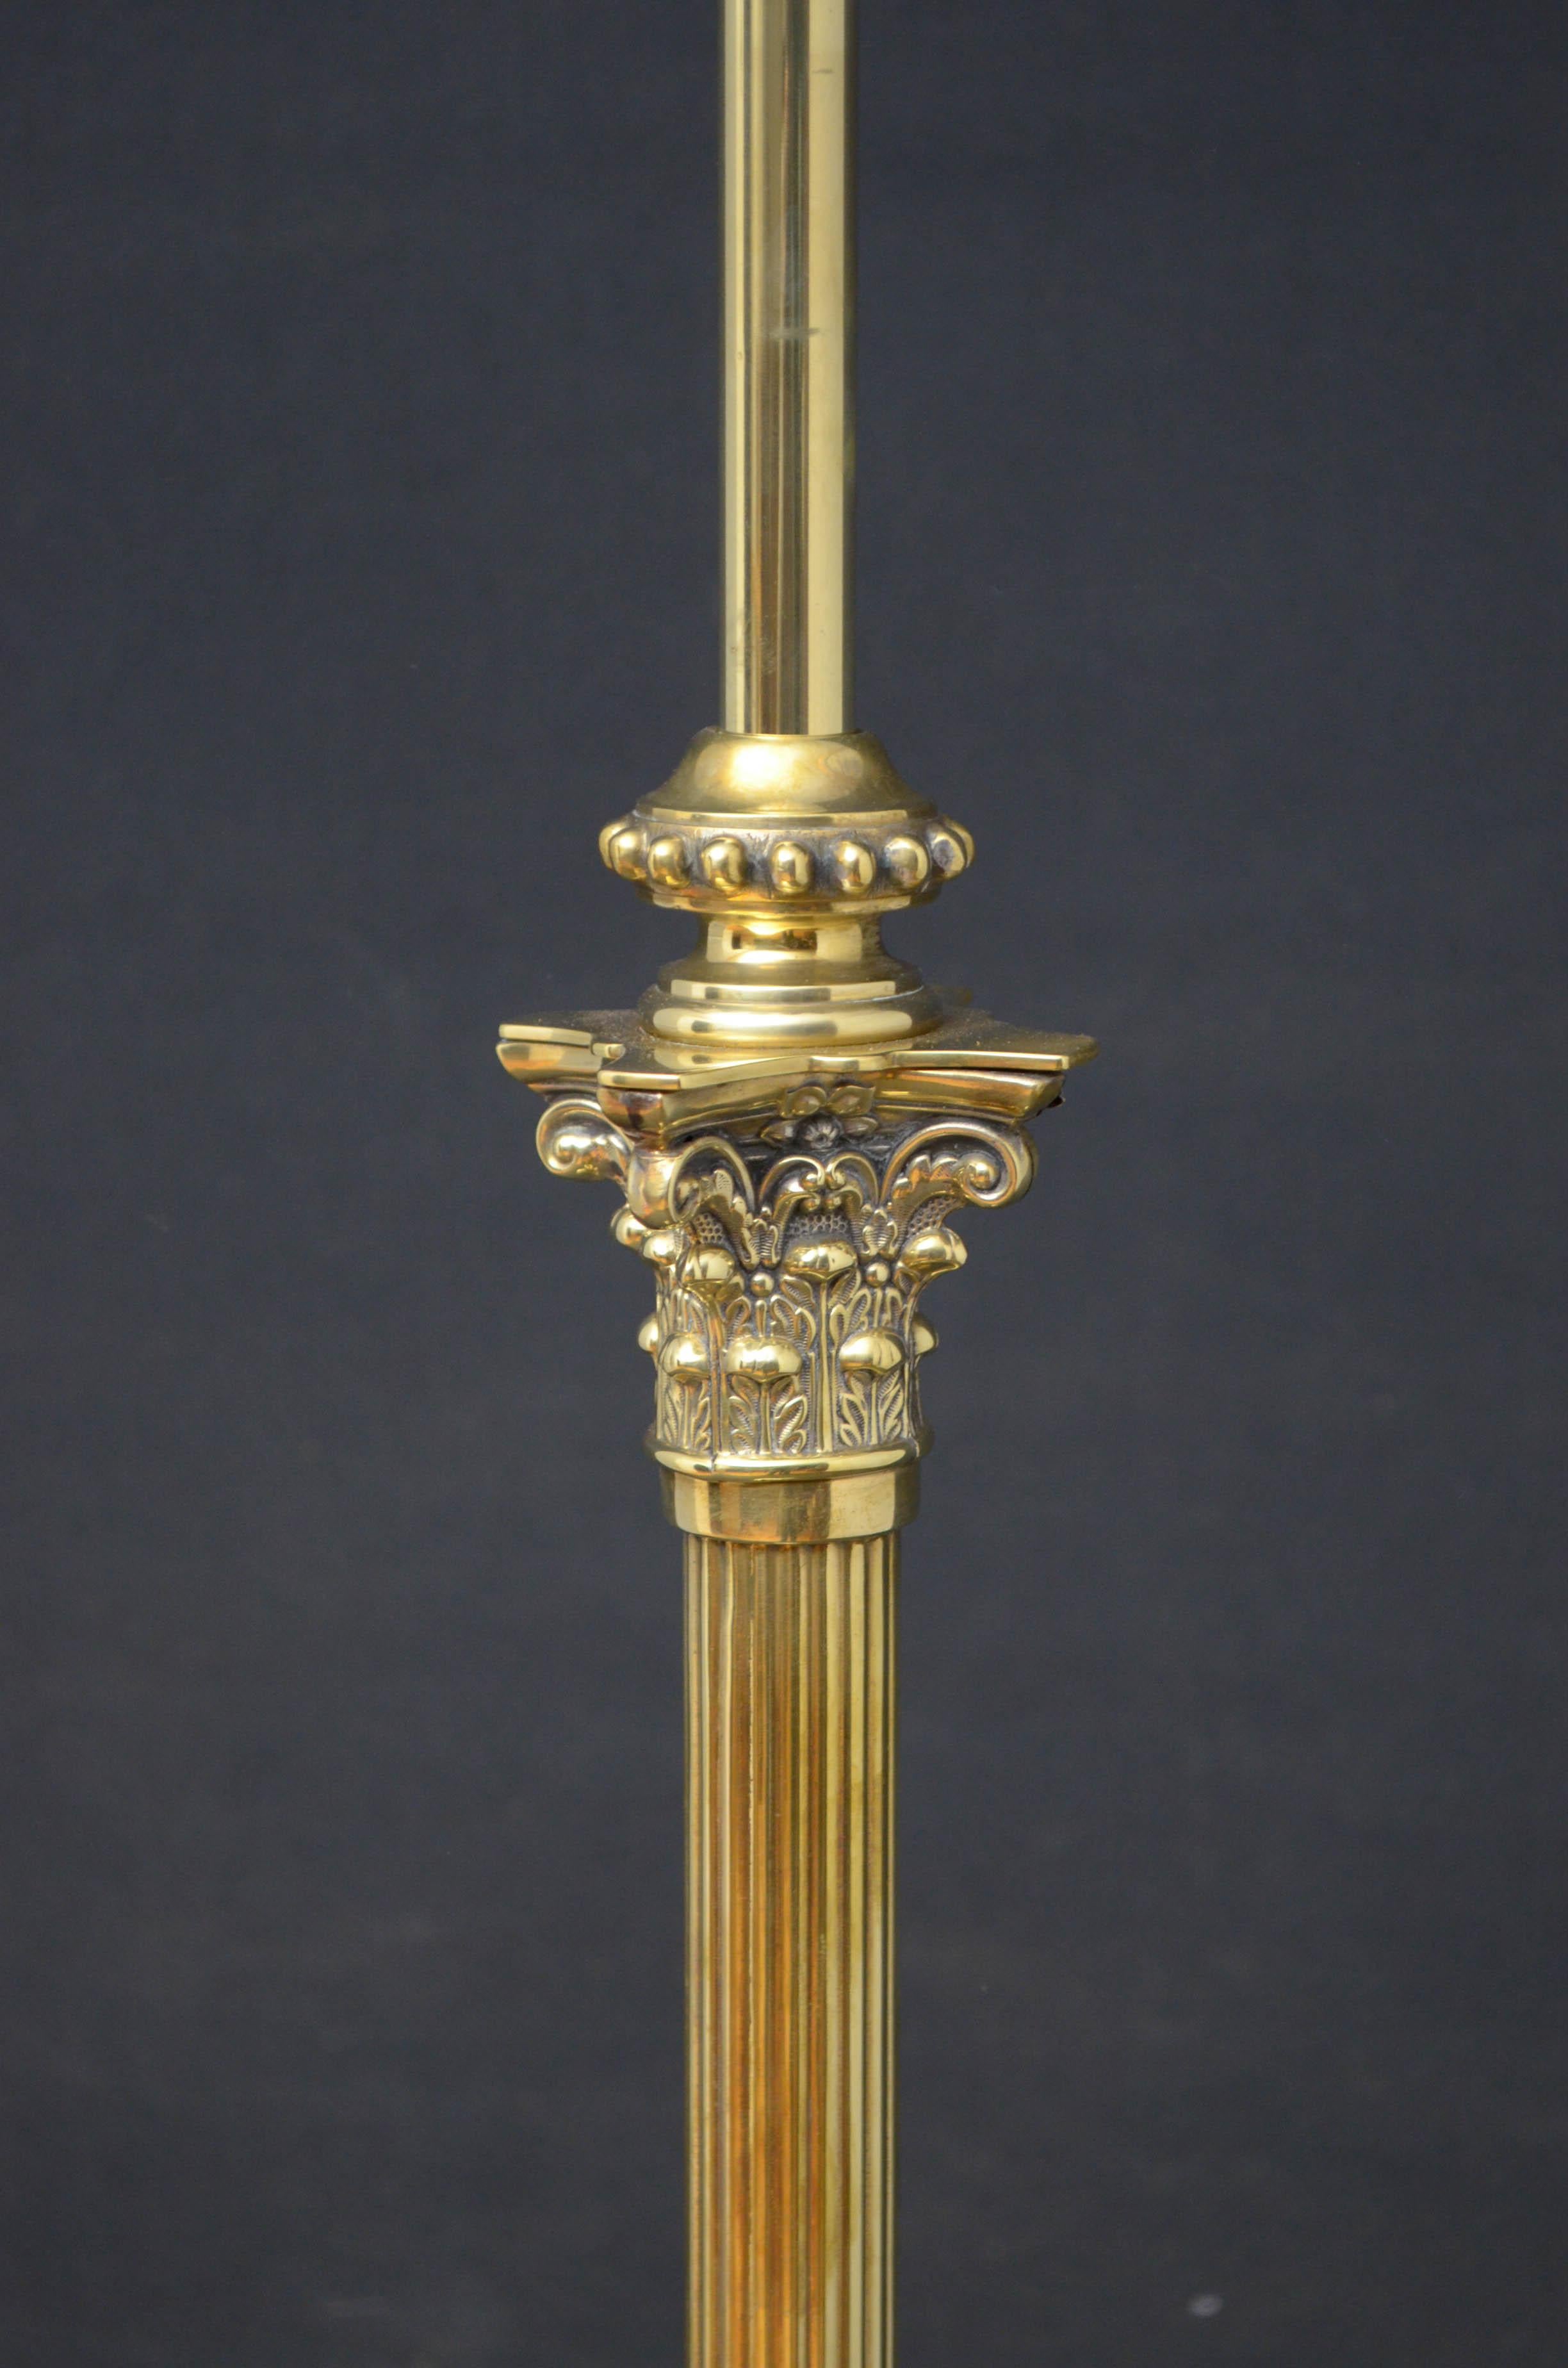 Sn4669, brass, height adjustable, standard lamp, having fluted Corinthian column, stepped base and paw feet. This antique lamp has been pat tested and is ready to place at home. Lampshade not included, circa 1910.

Measures: H 51-65? W 13.5? x D